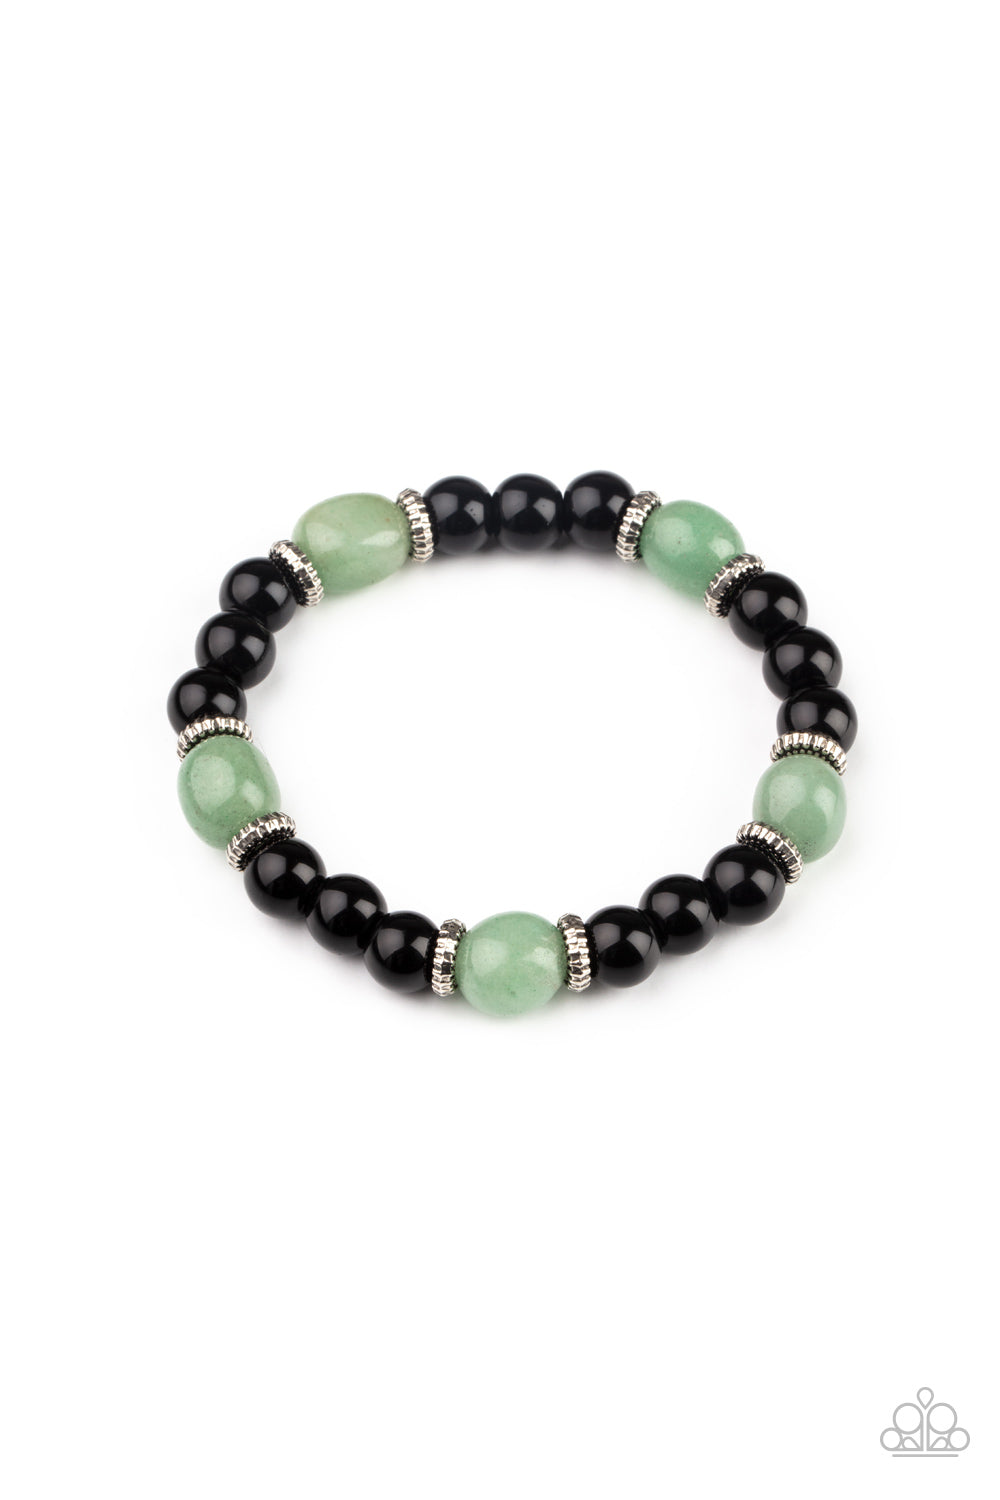 Unity Green Urban Bracelet - Paparazzi Accessories  Infused with dainty silver accents, glassy black and green stone beads are threaded along a stretchy band around the wrist for a stackable seasonal look.  All Paparazzi Accessories are lead free and nickel free!  Sold as one individual bracelet.